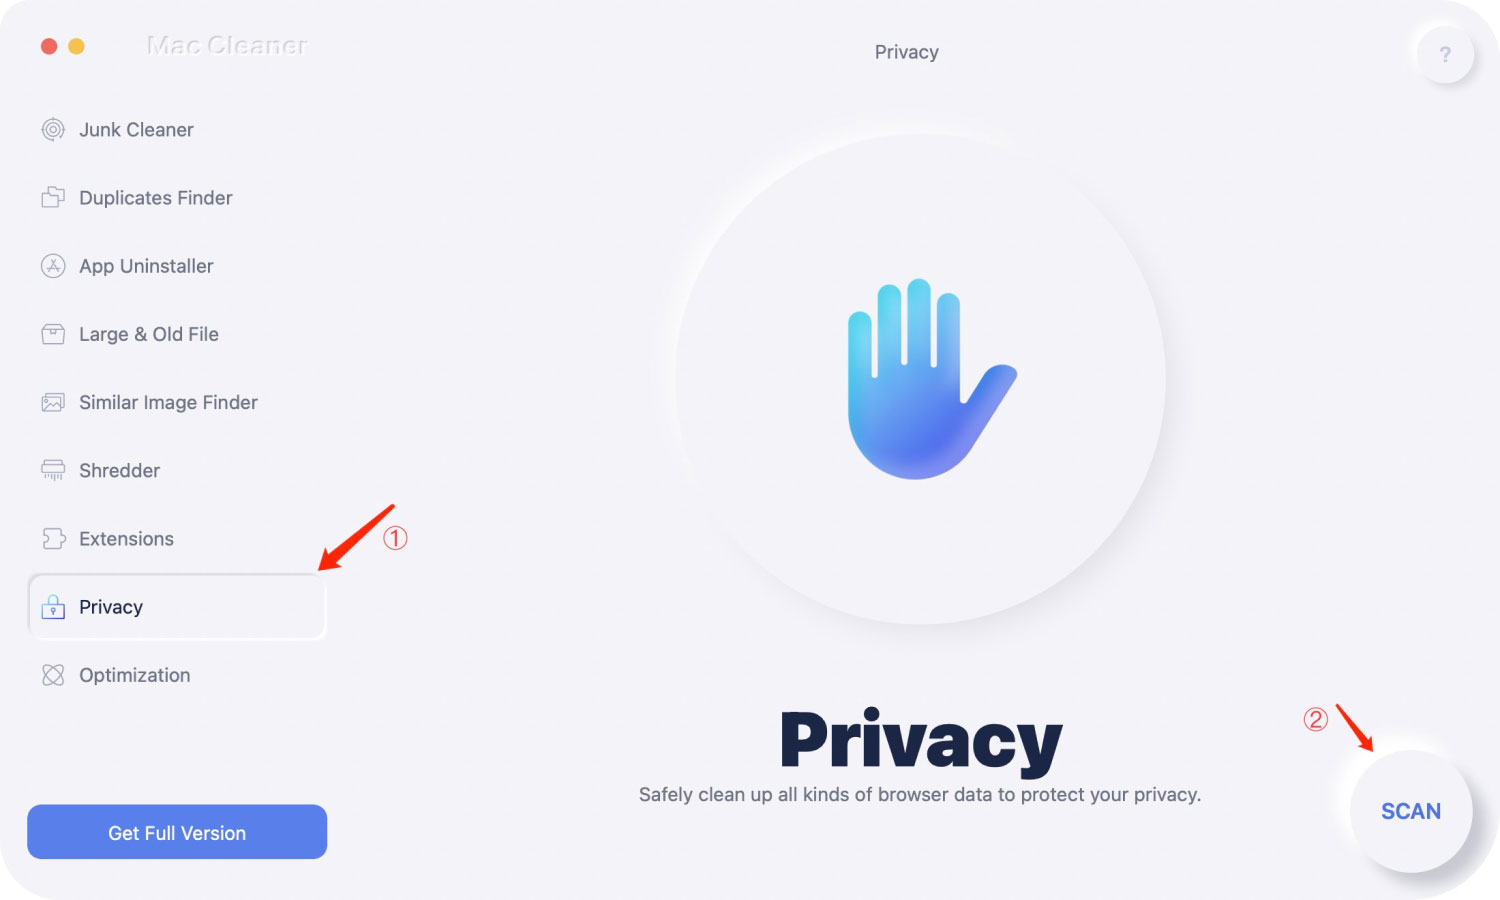 Select Privacy